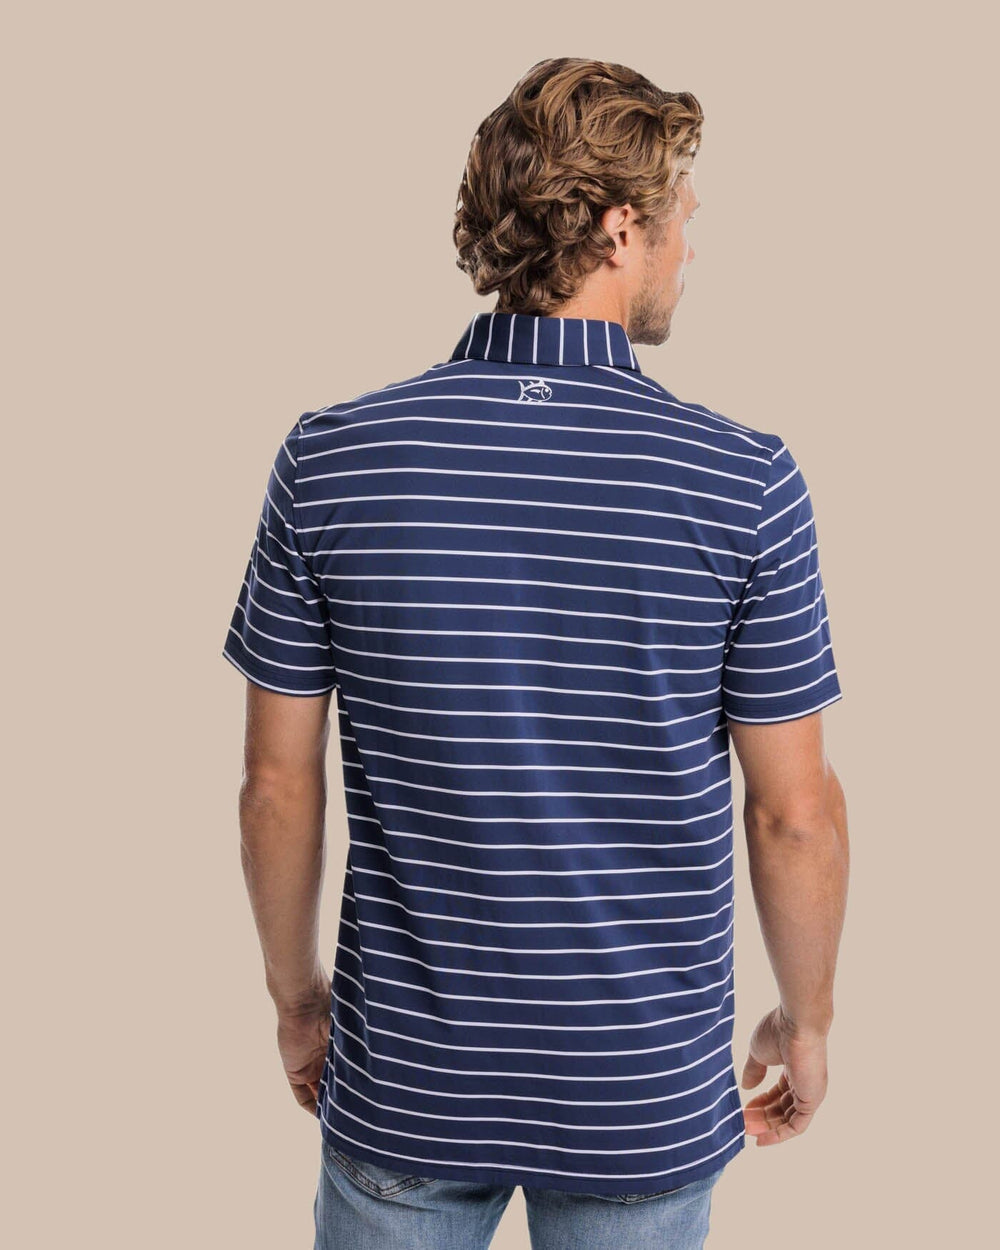 The back view of the Southern Tide brrr-eeze Desmond Stripe Performance Polo by Southern Tide - Navy